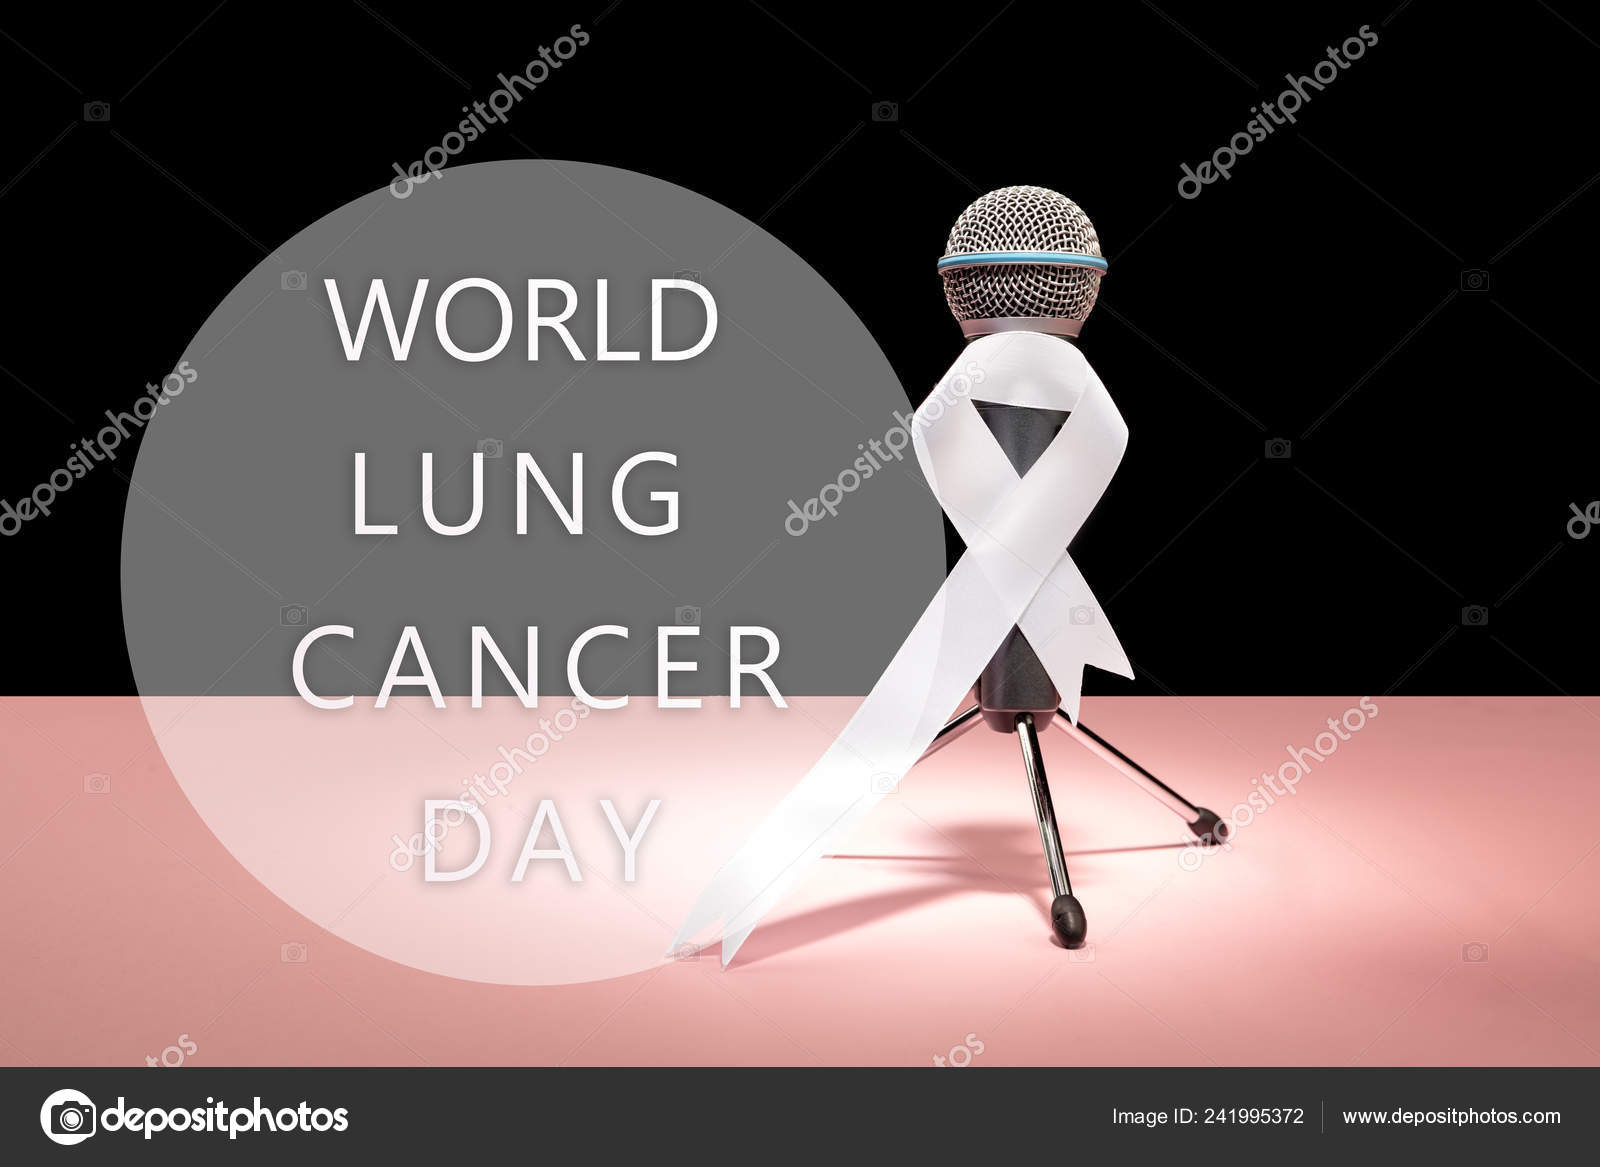 Support White: The Lung Cancer Ribbon